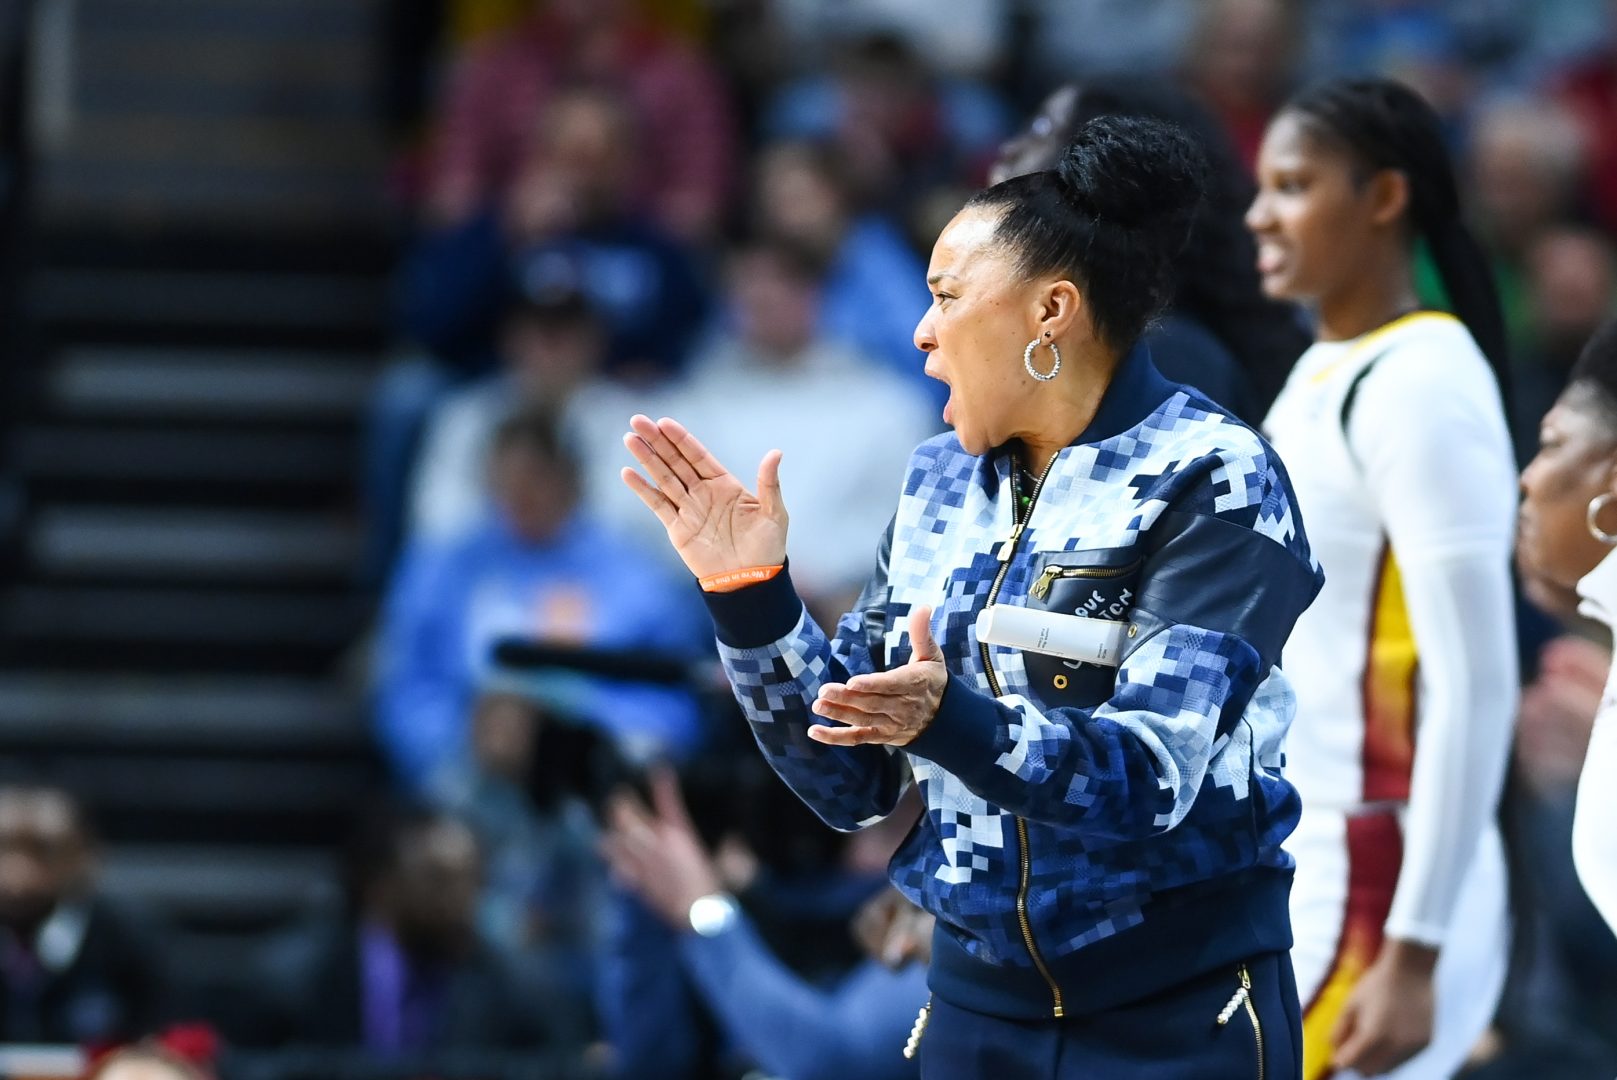 Coach Dawn Staley stays true to the game and remains undefeated